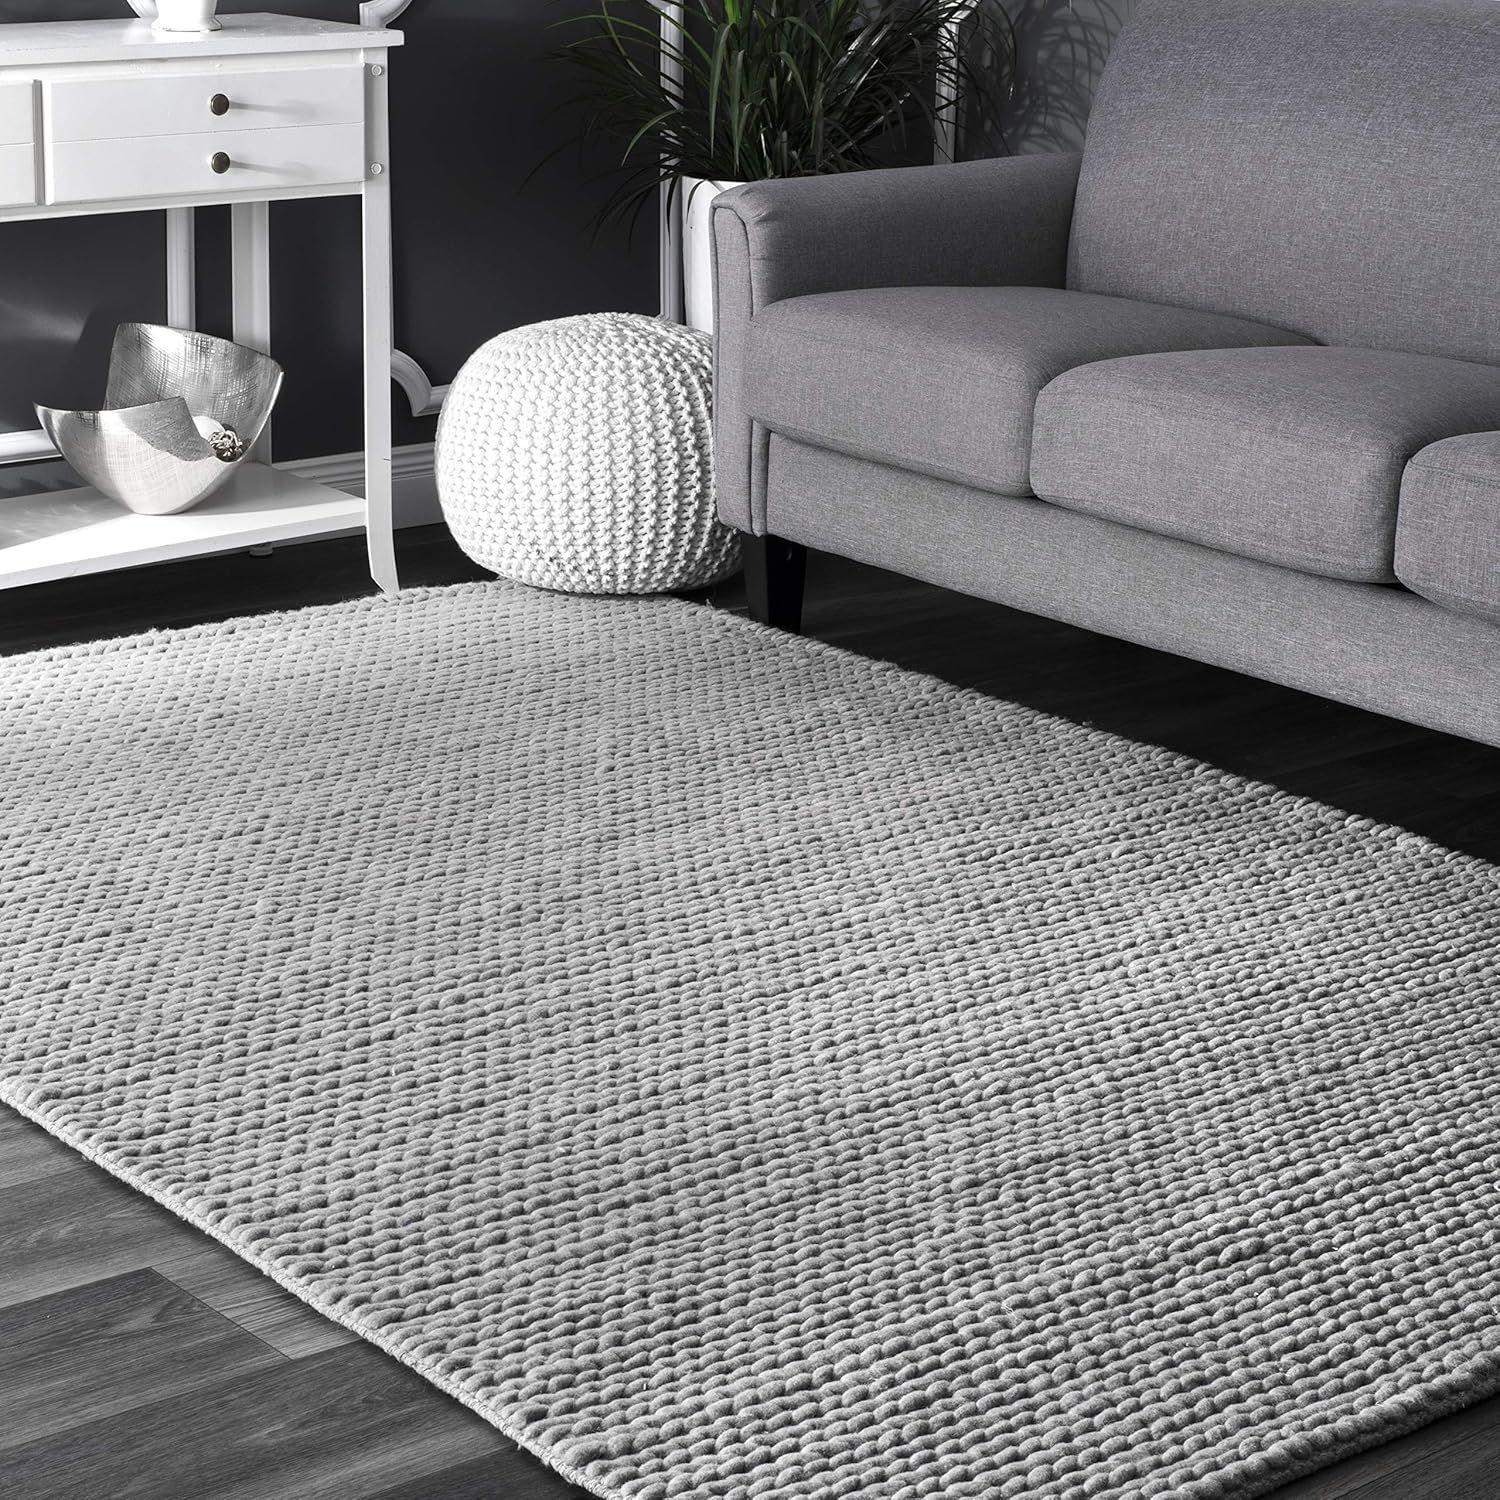 Hand-Tufted Braided Light Grey Wool Blend 3'x5' Area Rug